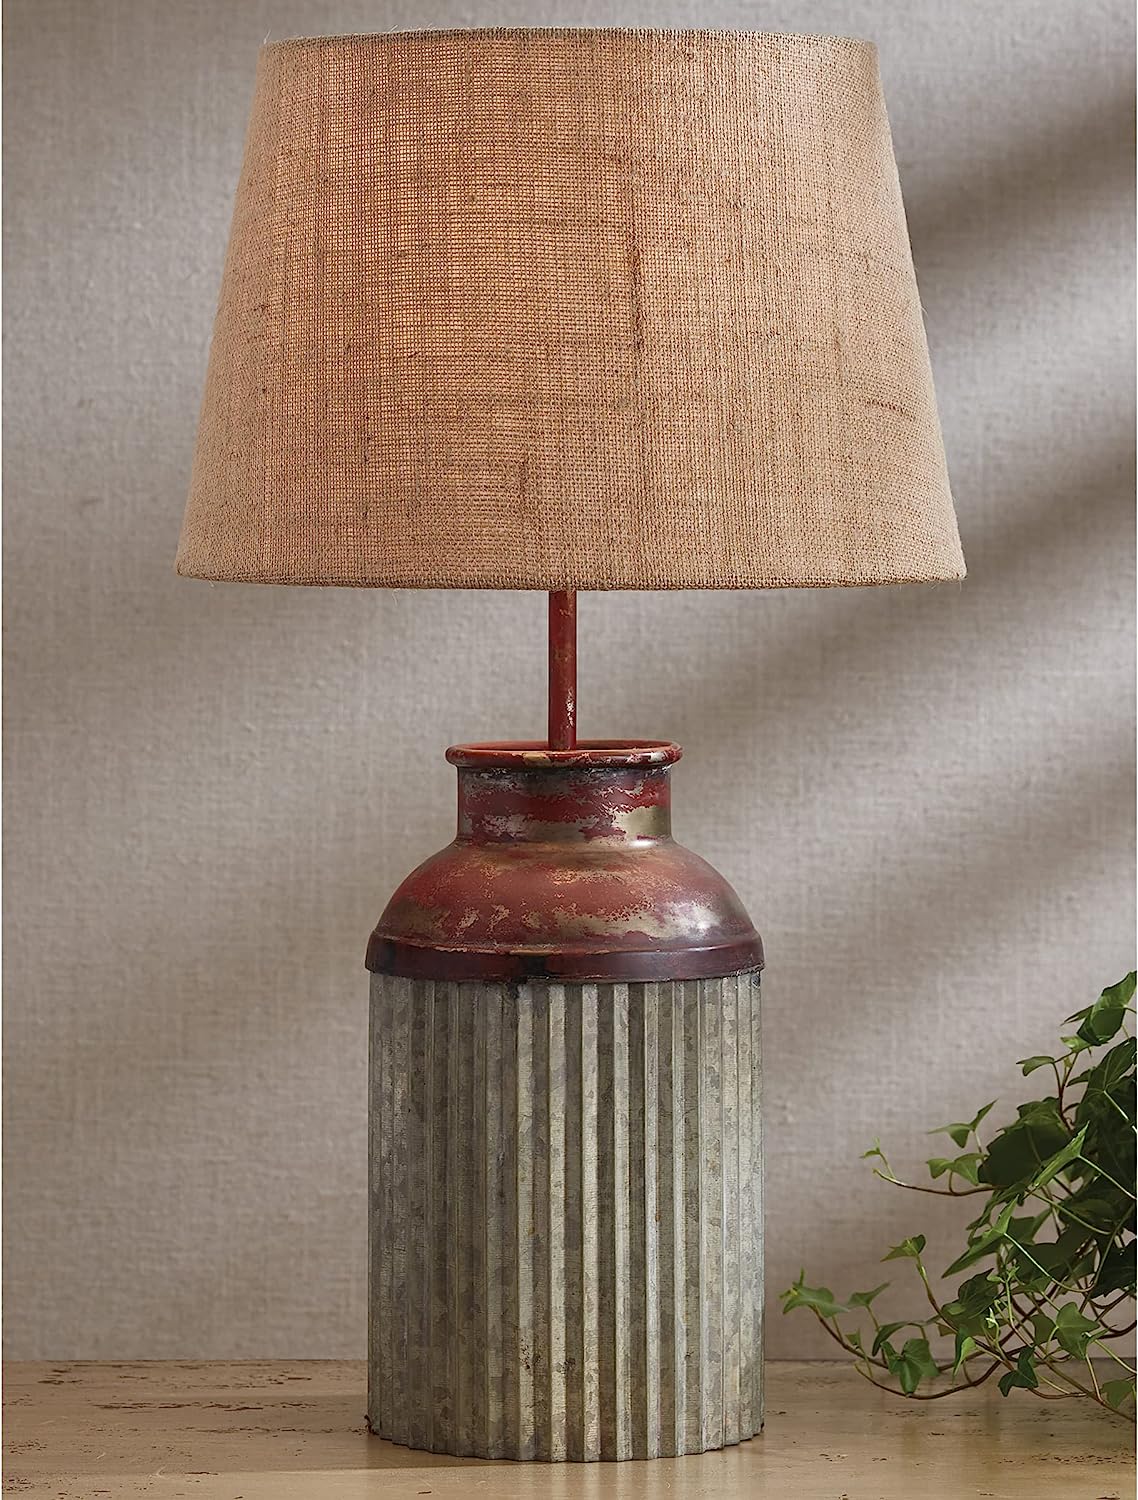 Crimped Canister Lamp with Shade - Park Designs